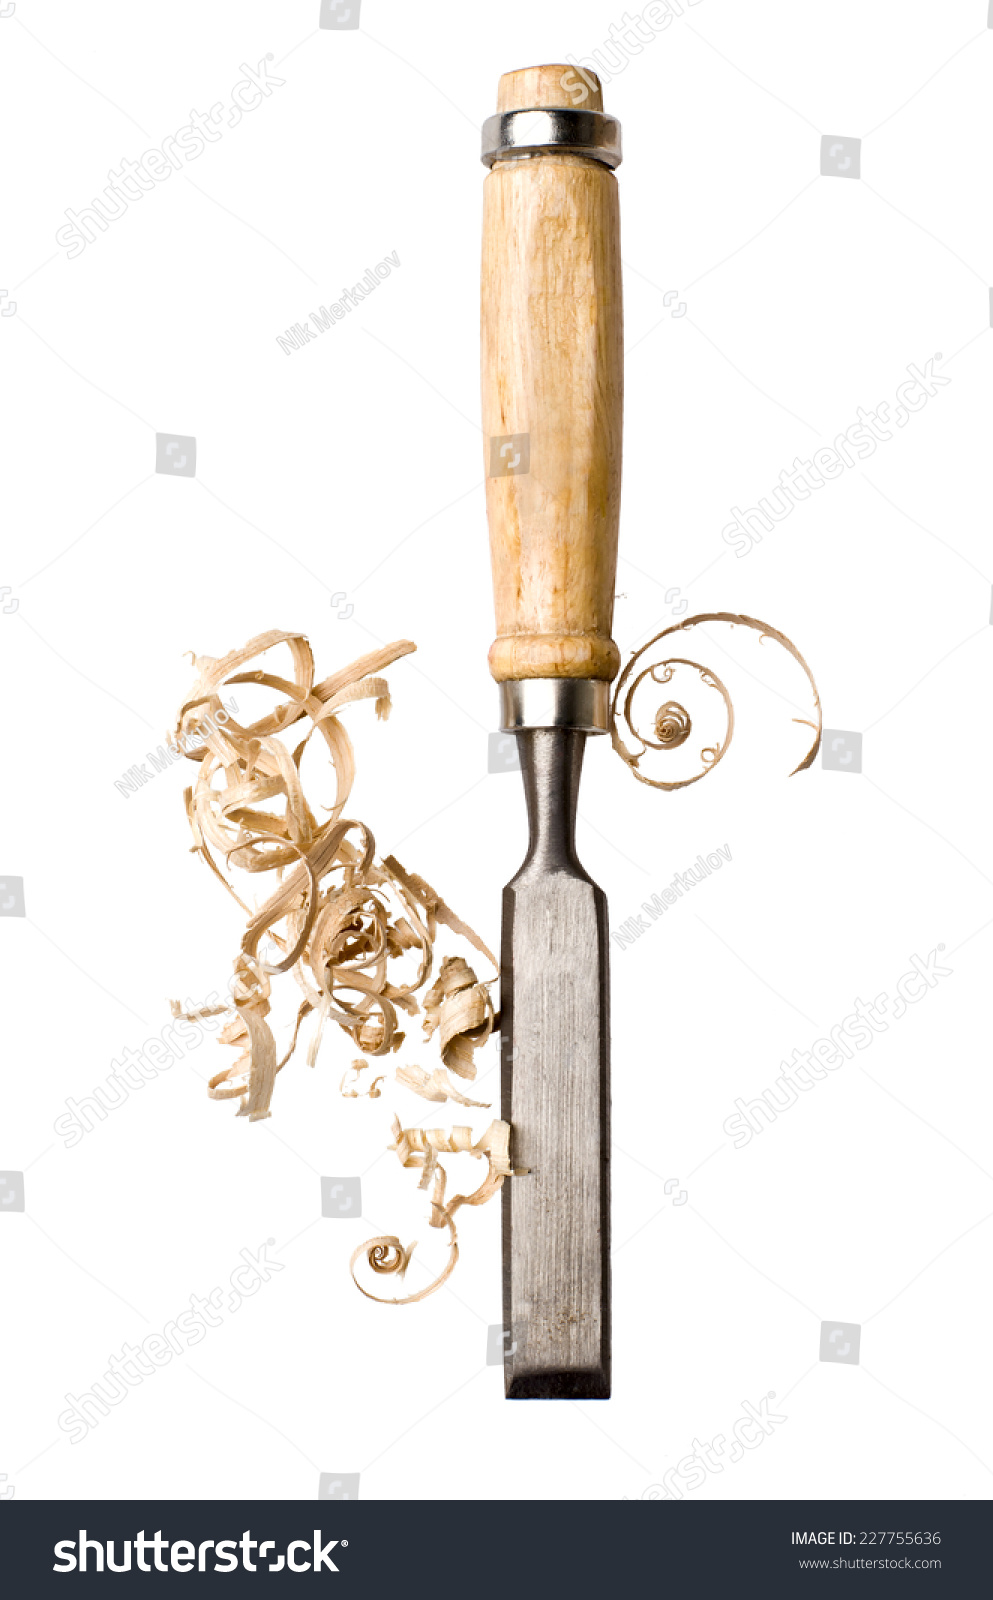 Chisel and shavings isolated on white background #227755636